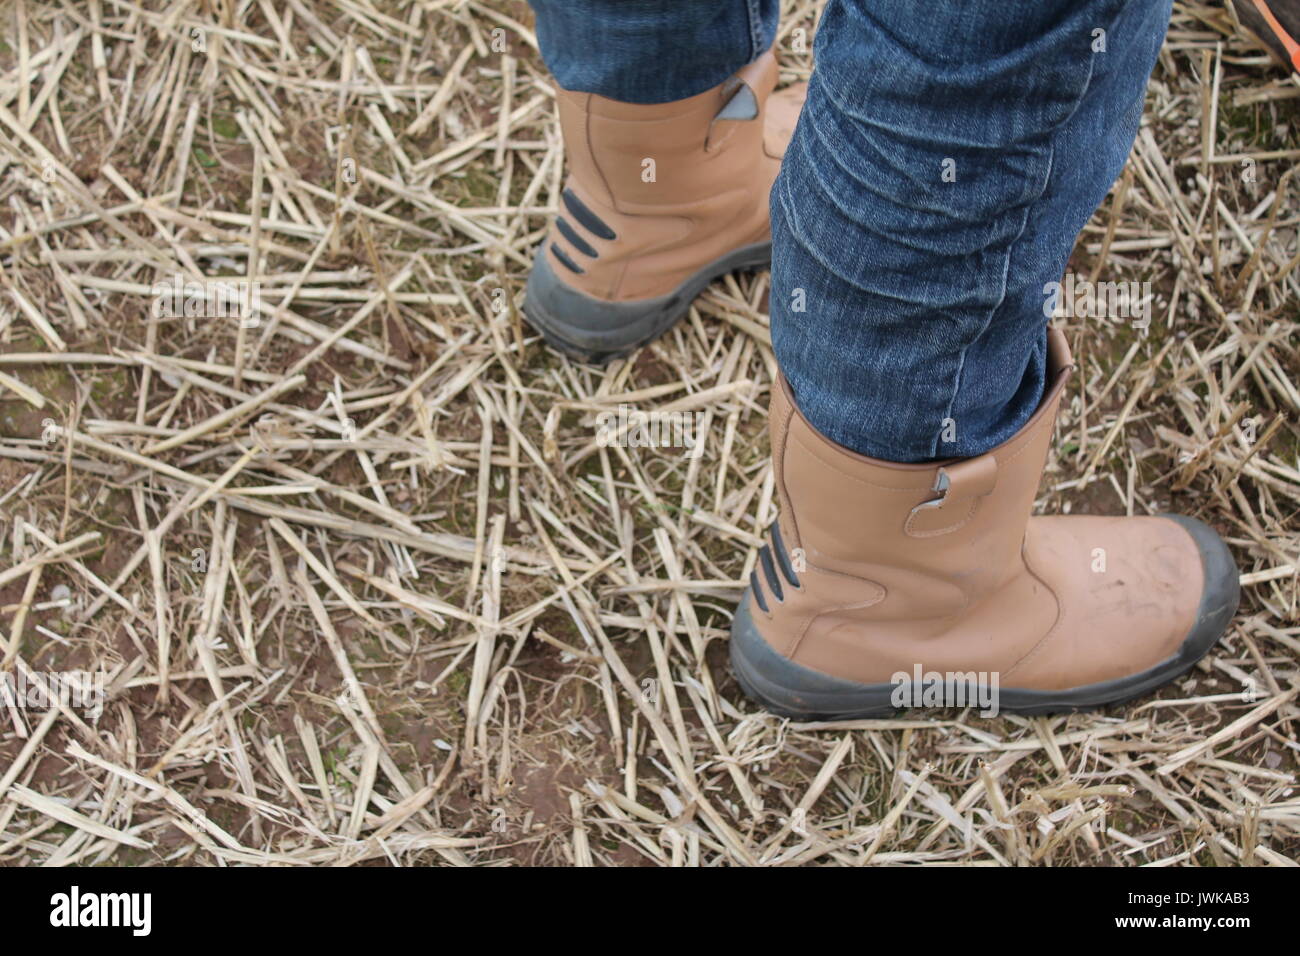 Don't look down. Man wearing jeans and rigger work boots standing on cut straw. Stock Photo